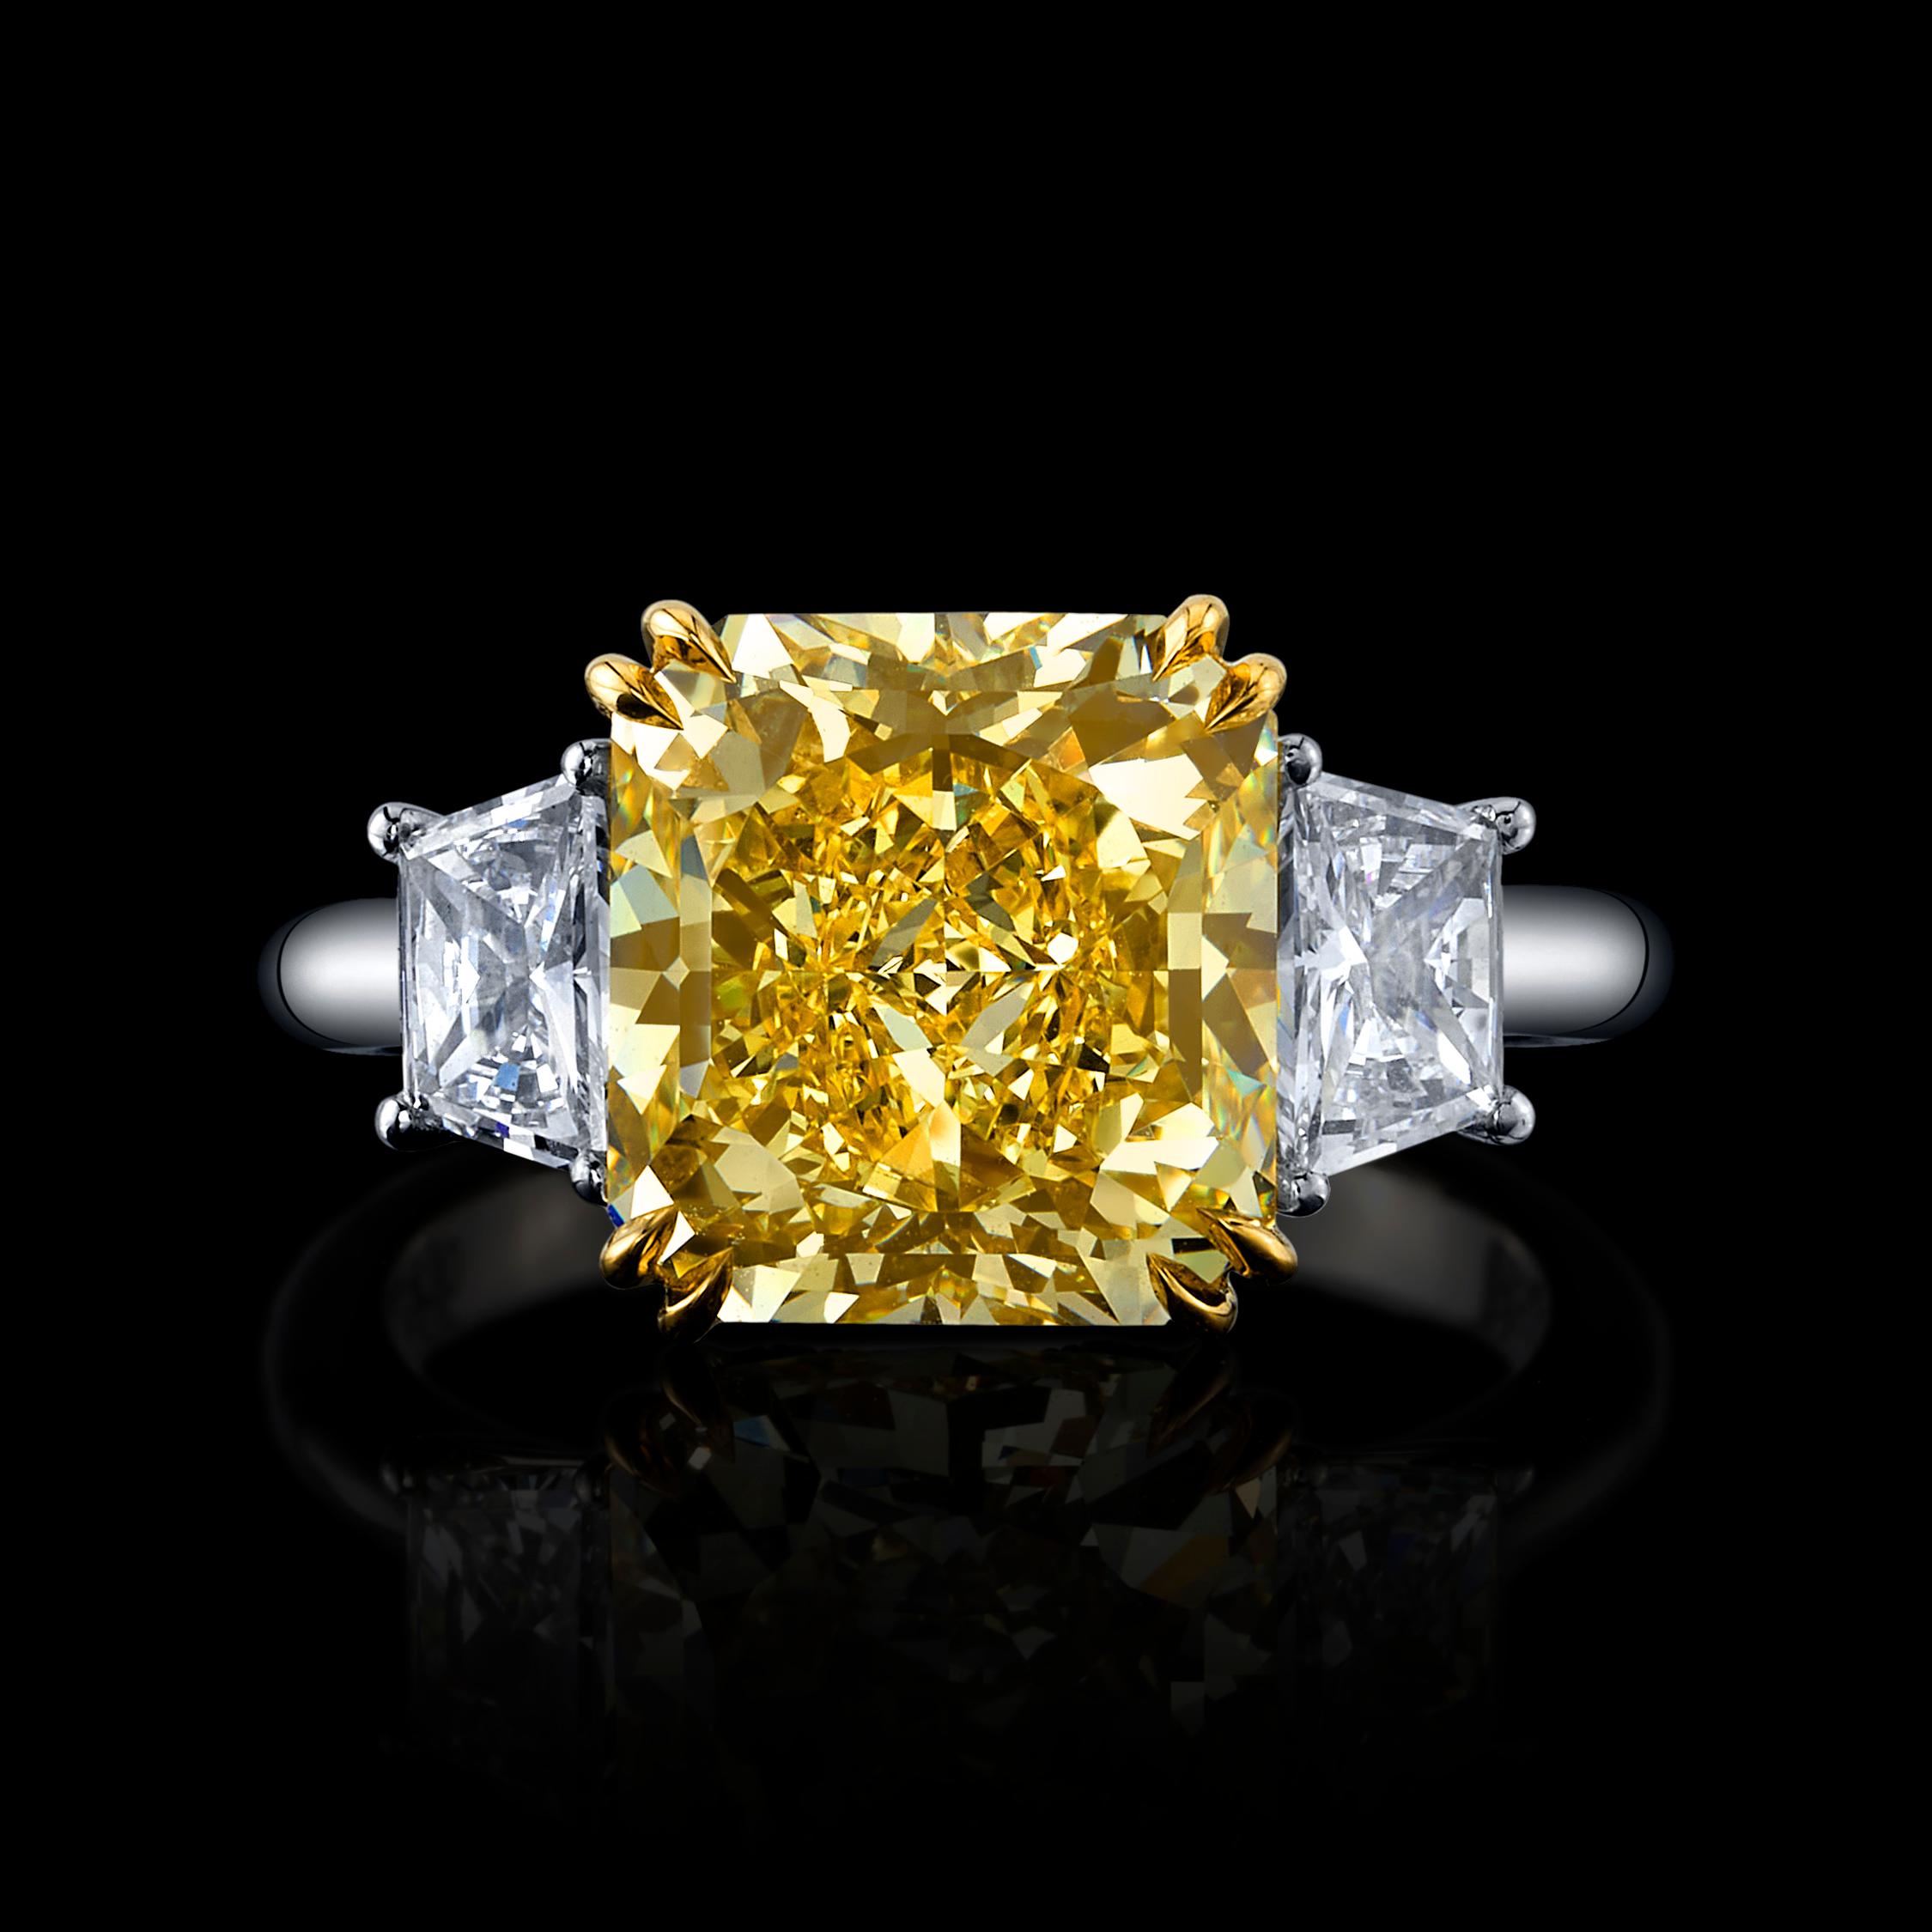 Modern GIA Certified, Large and Classic 5.10ct Radiant Fancy Yellow Diamond, IF